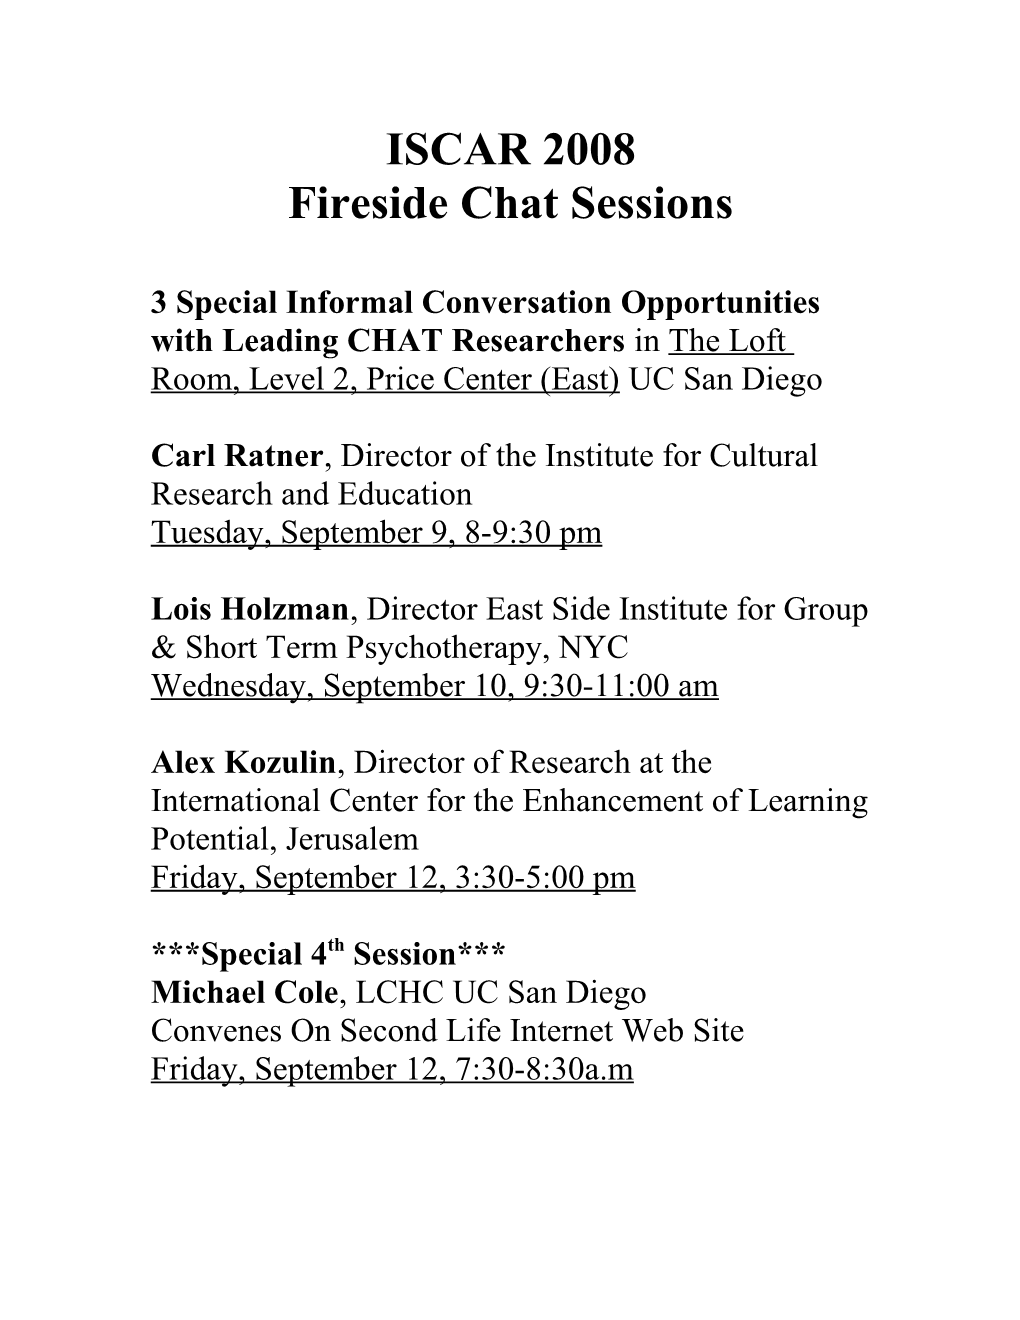 Fireside Chat Sessions